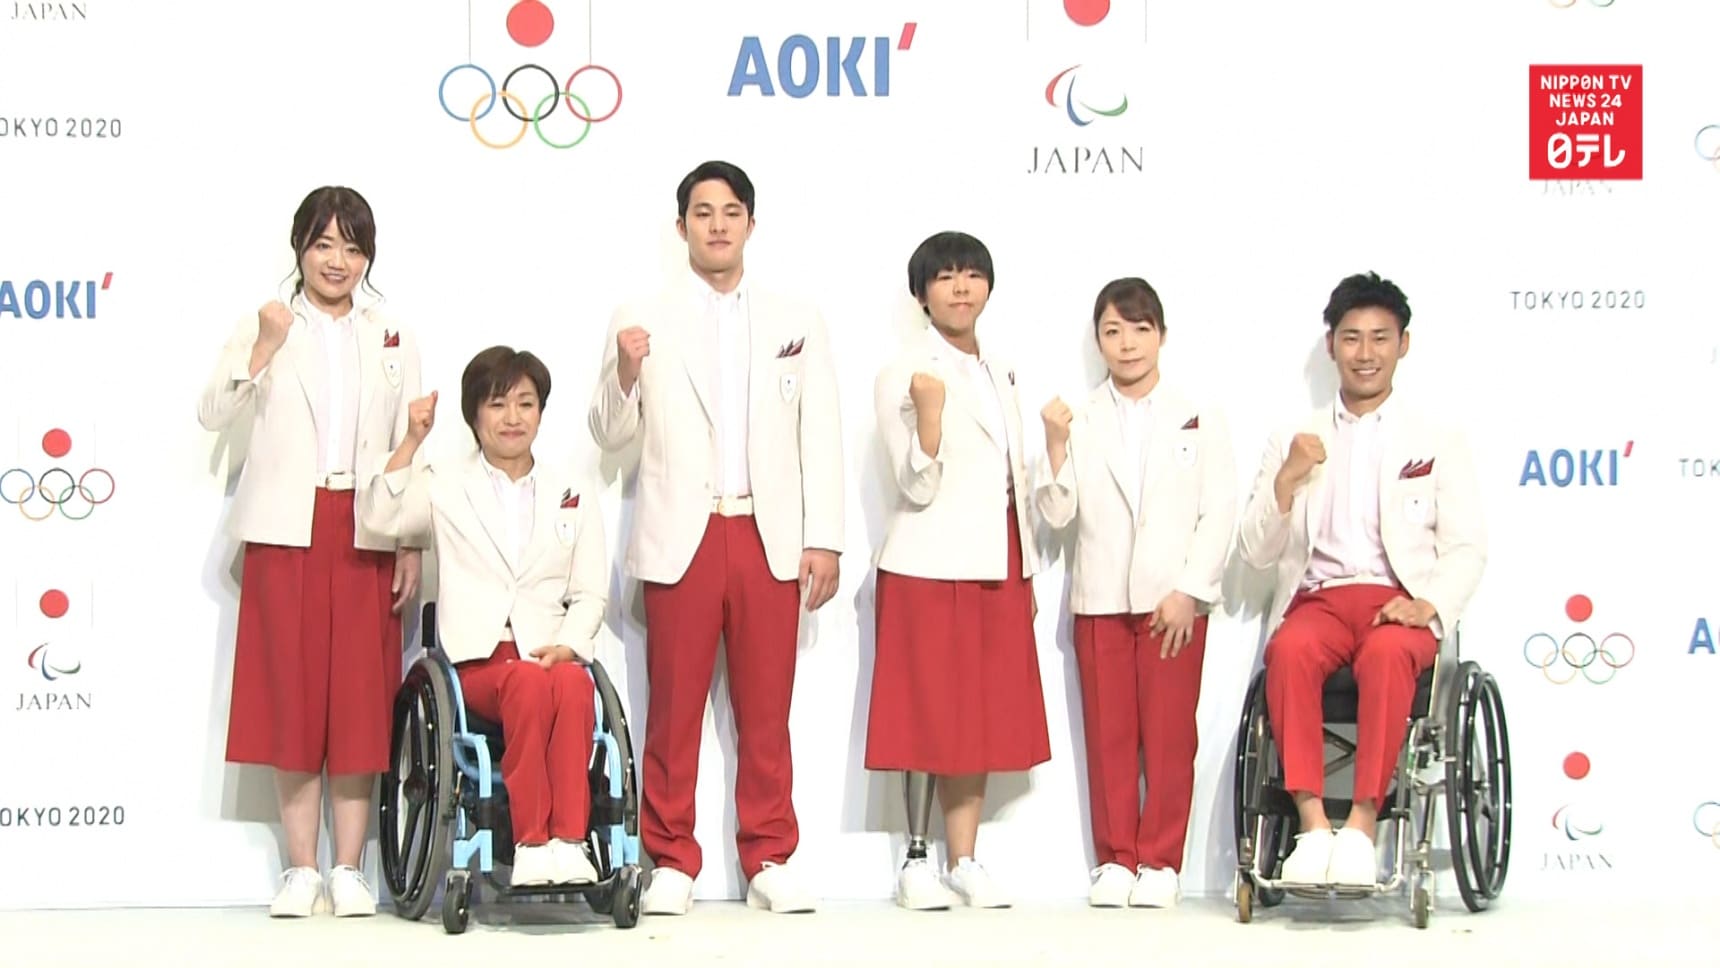 Japan’s Olympic Uniforms Unveiled